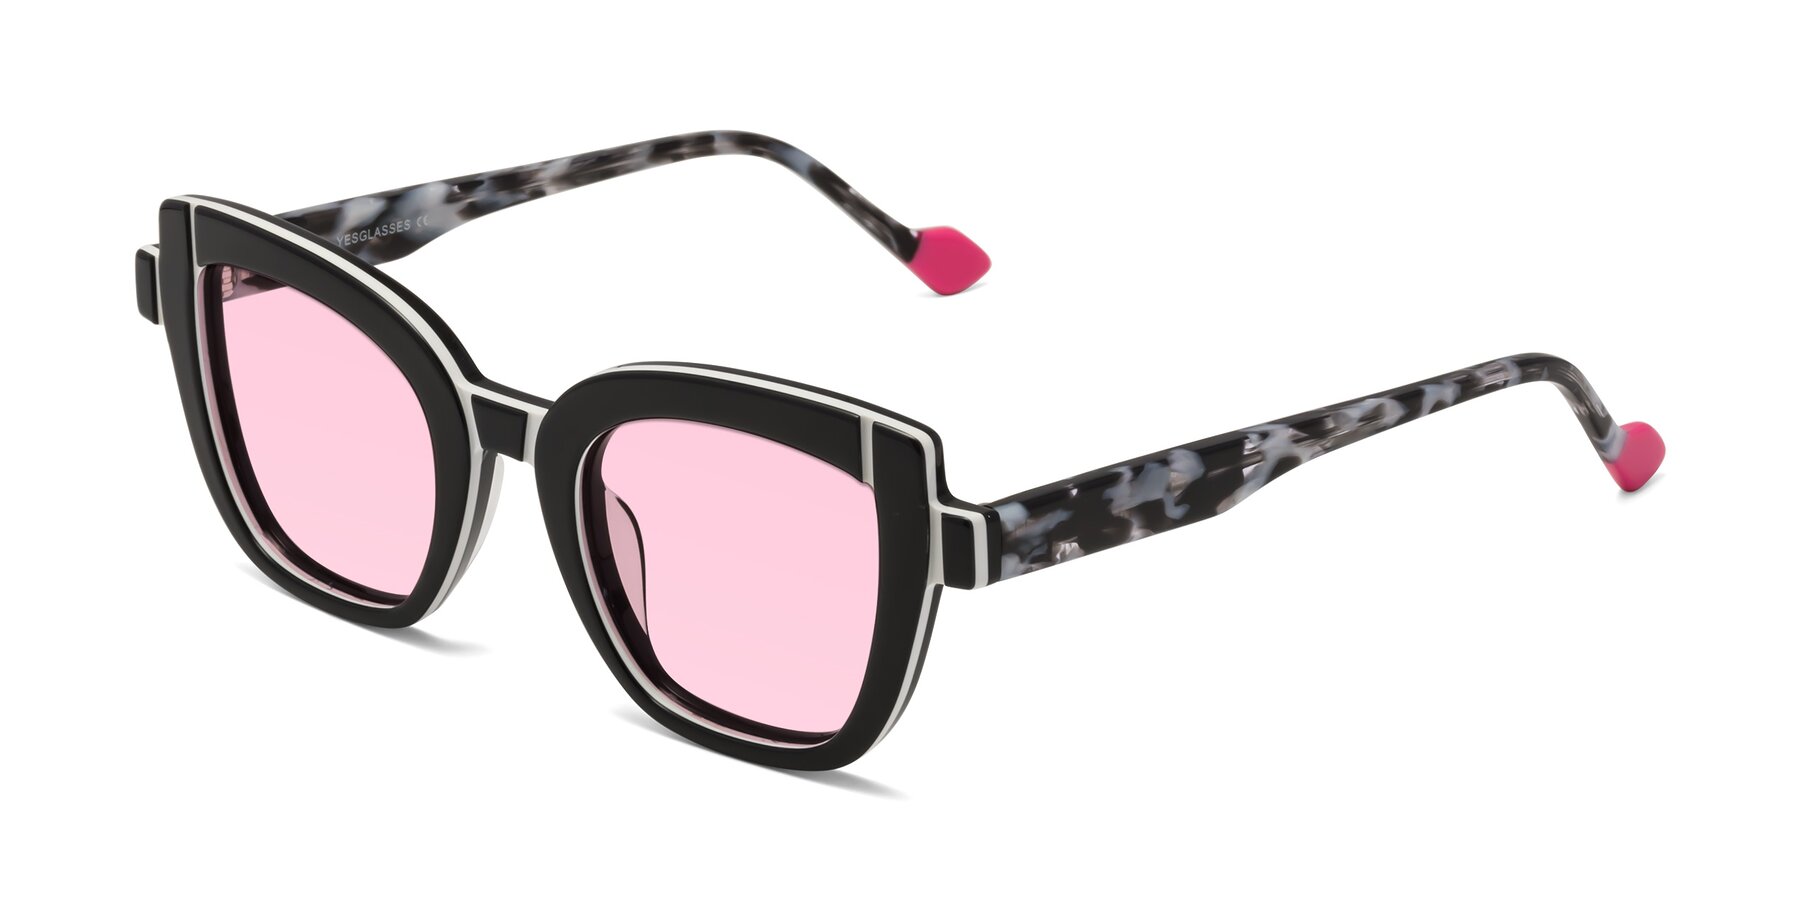 Angle of Sato in Black-White with Light Pink Tinted Lenses